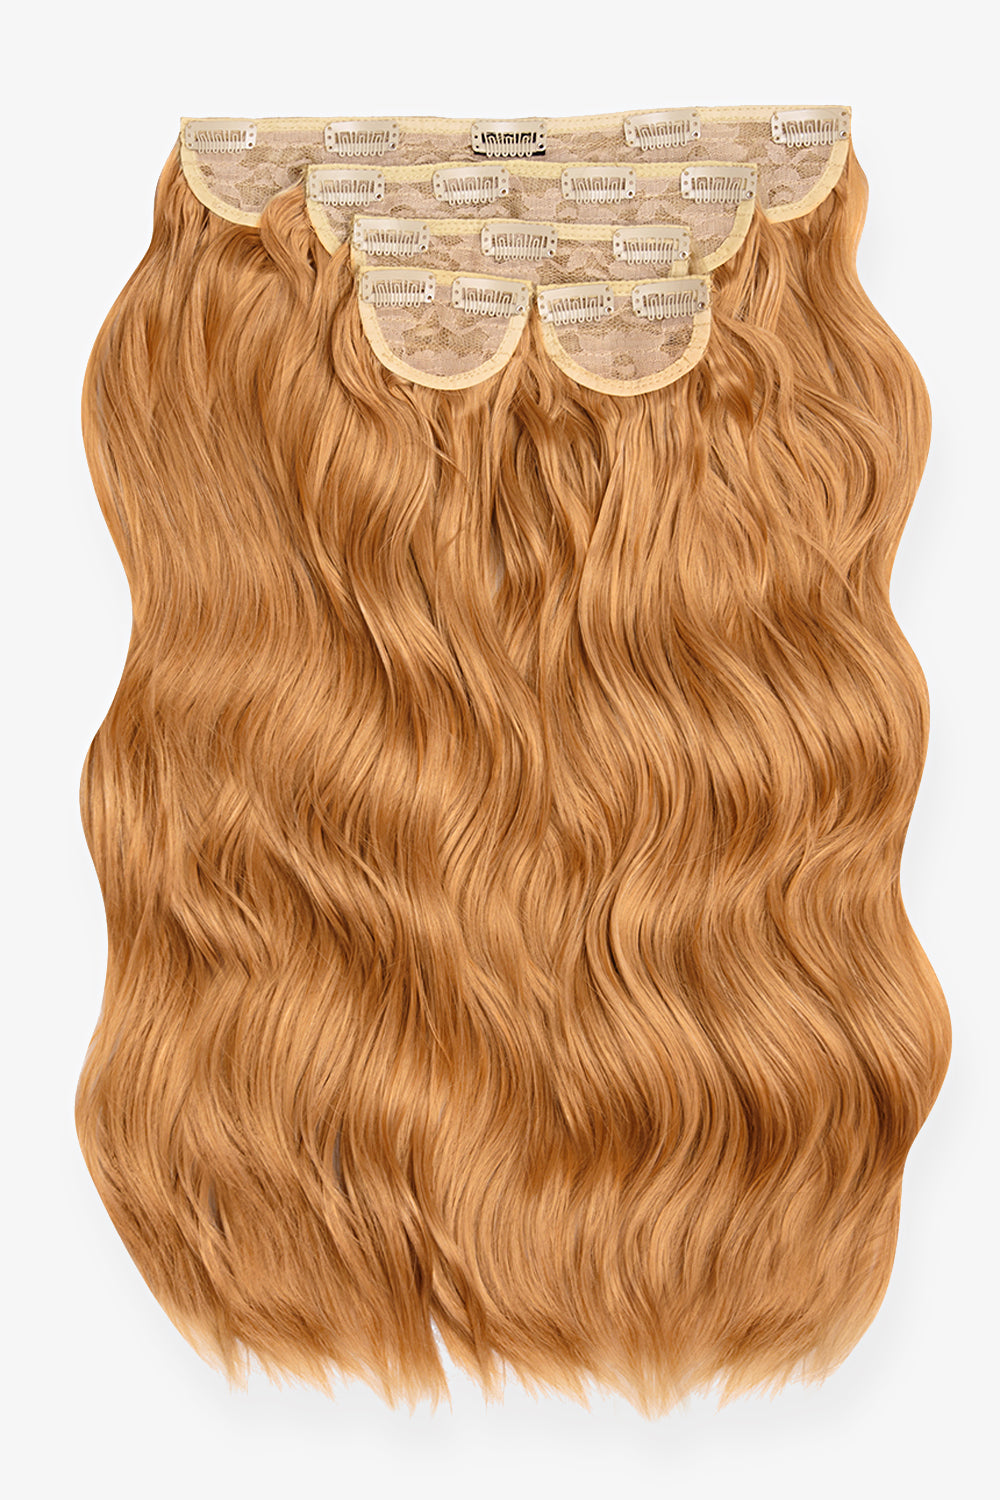 Super Thick 22’’ 5 Piece Brushed Out Wave Clip In Hair Extensions - Strawberry Blonde